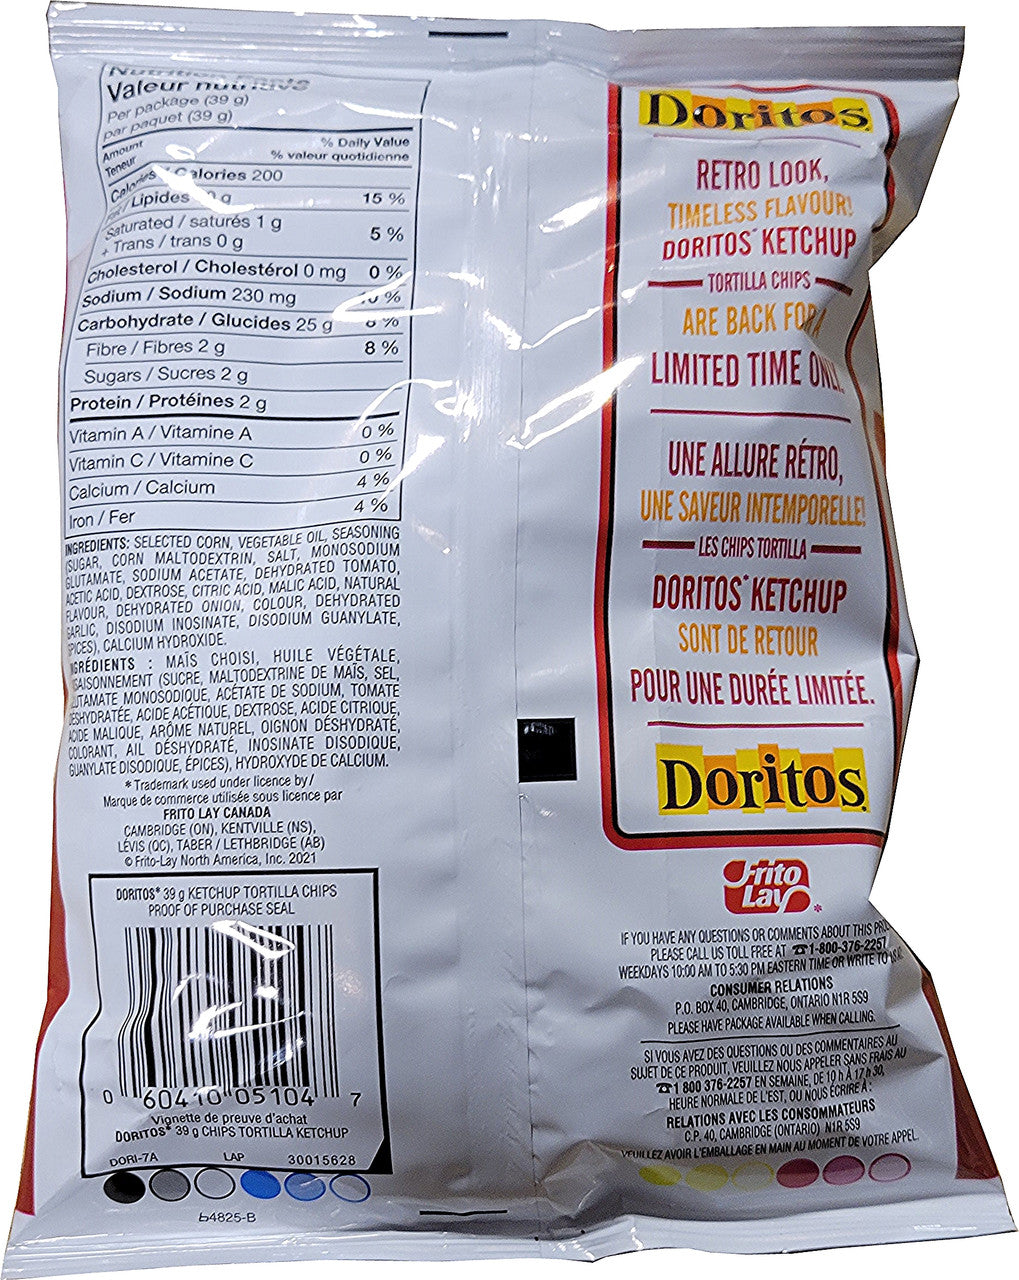 Doritos Ketchup Tortilla Chips, 39g/1.4 oz, Vending Machine Size Bag, (Imported from Canada)